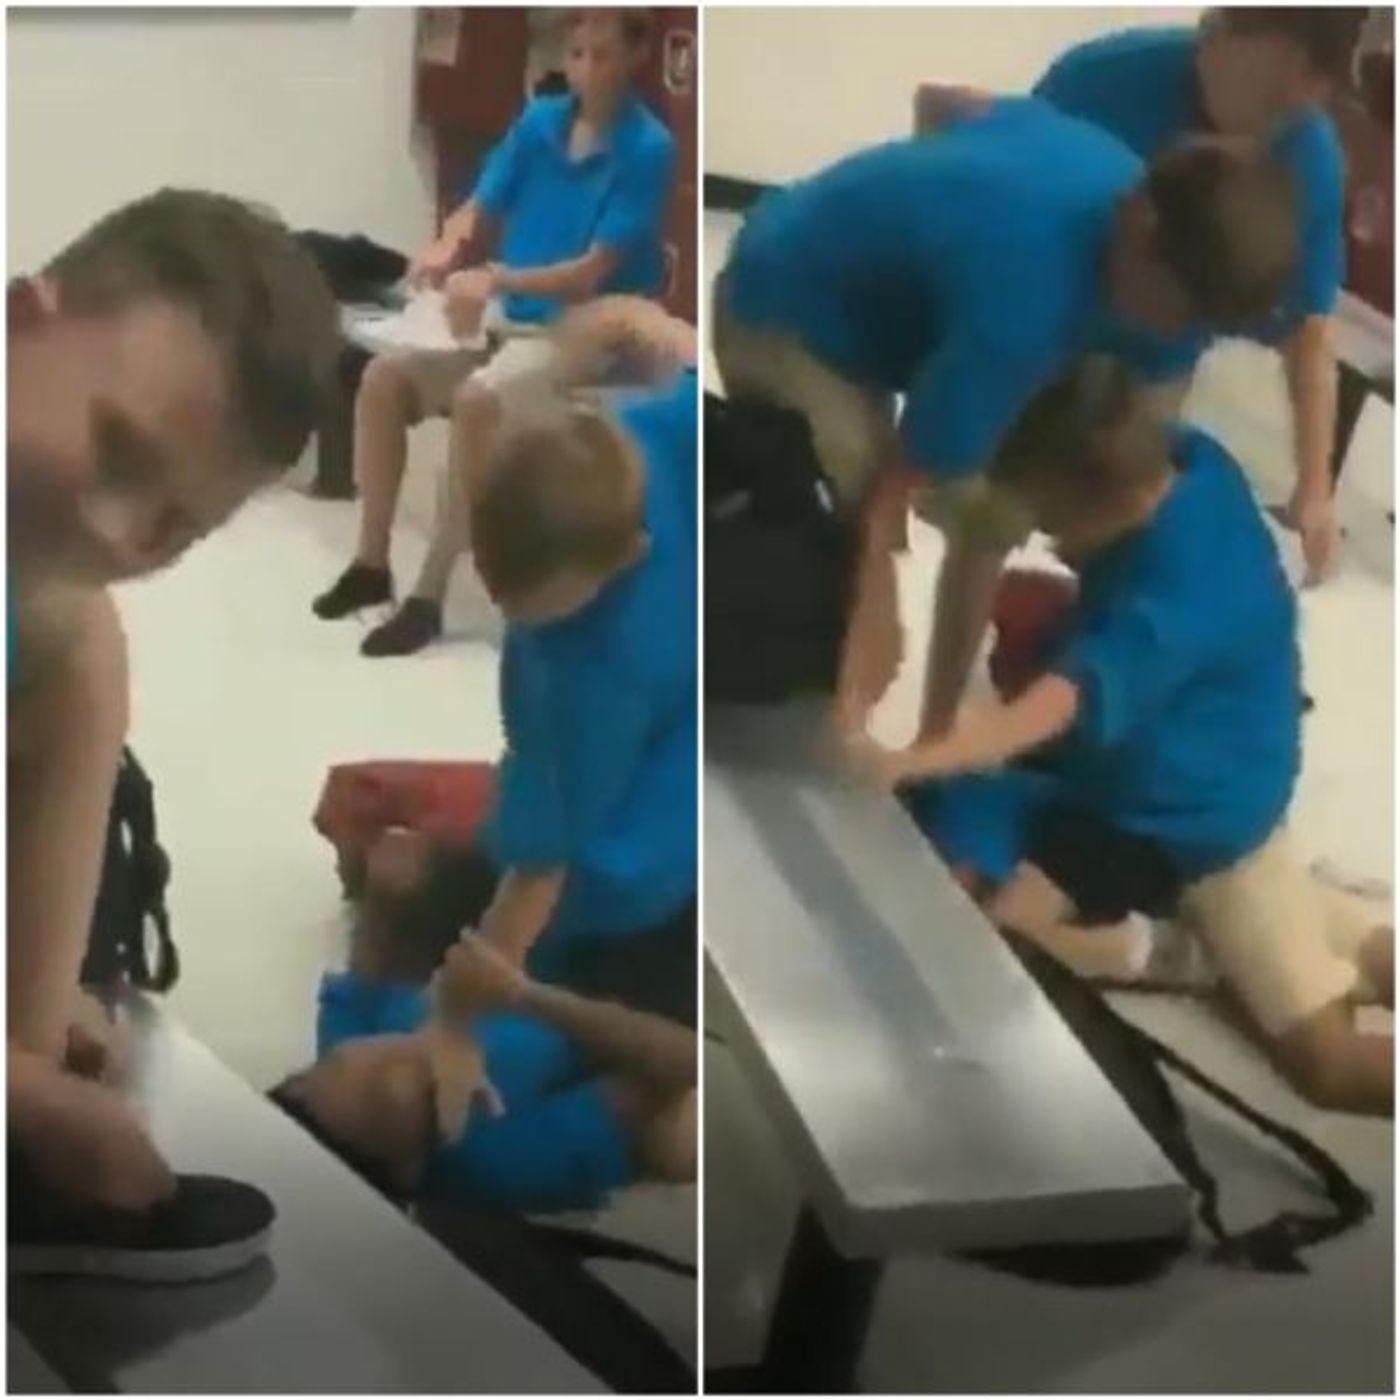 [VIDEO SURFACES] Three White boys Attack Black Boy and Judge Response is INSANE!!!